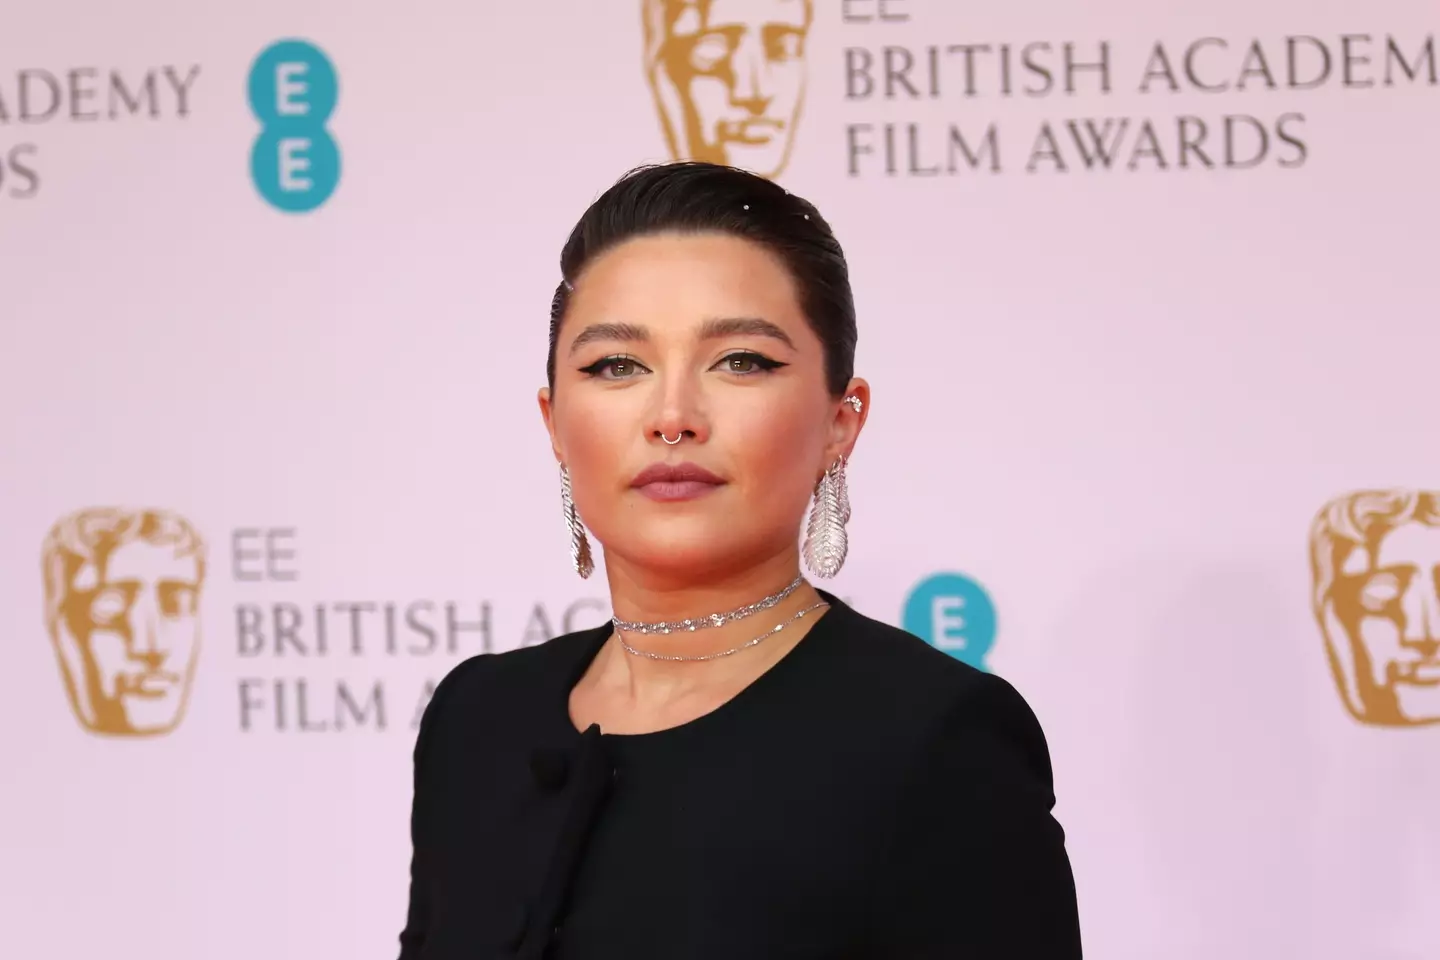 Florence Pugh previously defended her relationship with Braff.